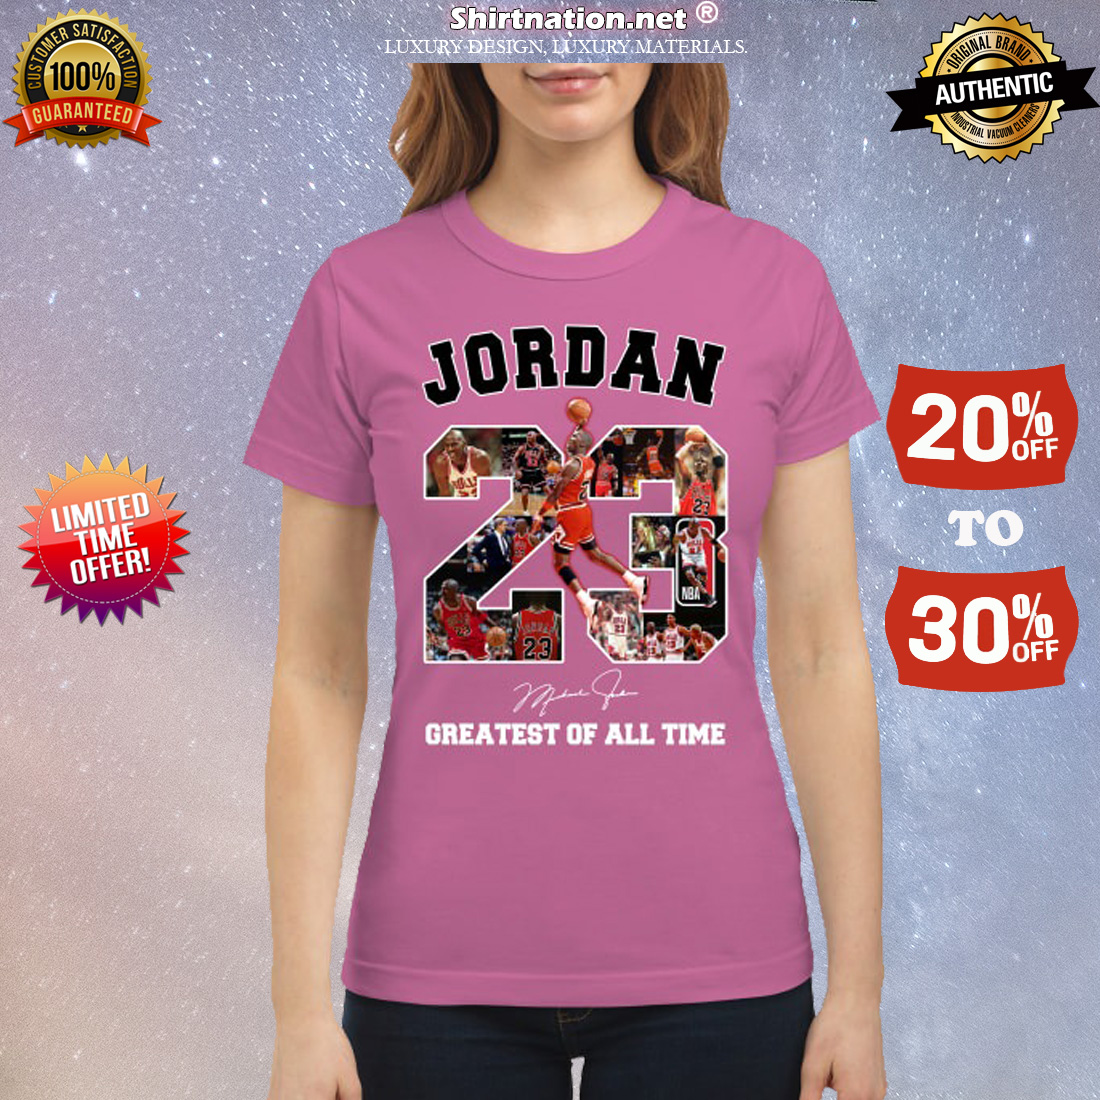 Micheal Jordan 23 greatest of all time classic shirt